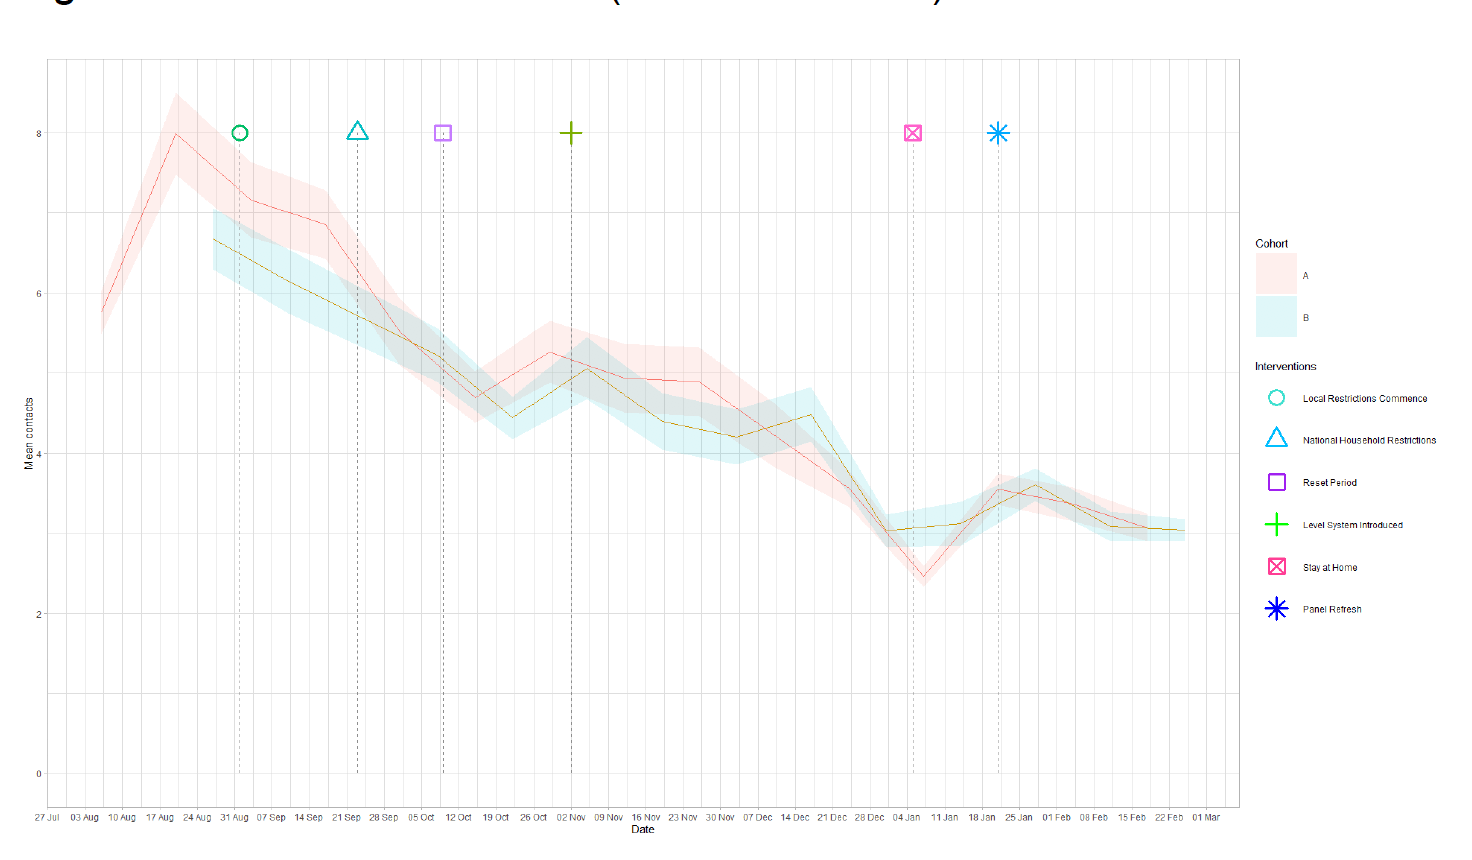 Figure 3. A line graph showing mean adult contacts by age group for panel A and panel B in the work setting from 6 Aug to 3 Mar.